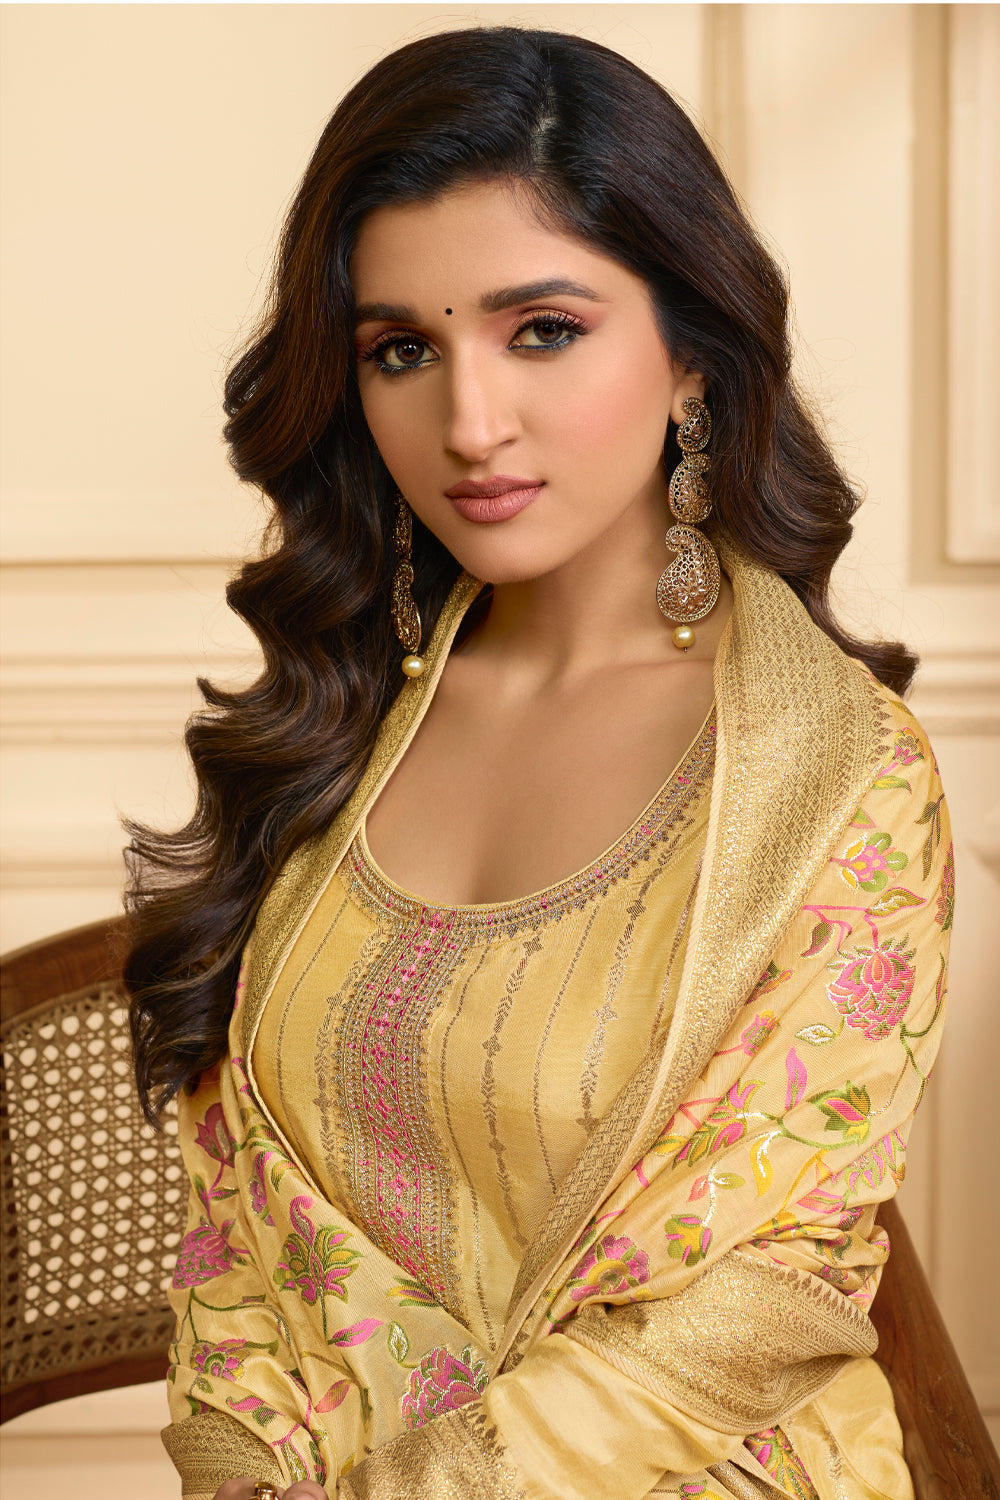 Mustard Colour Silk Woven Unstitched Suit Material